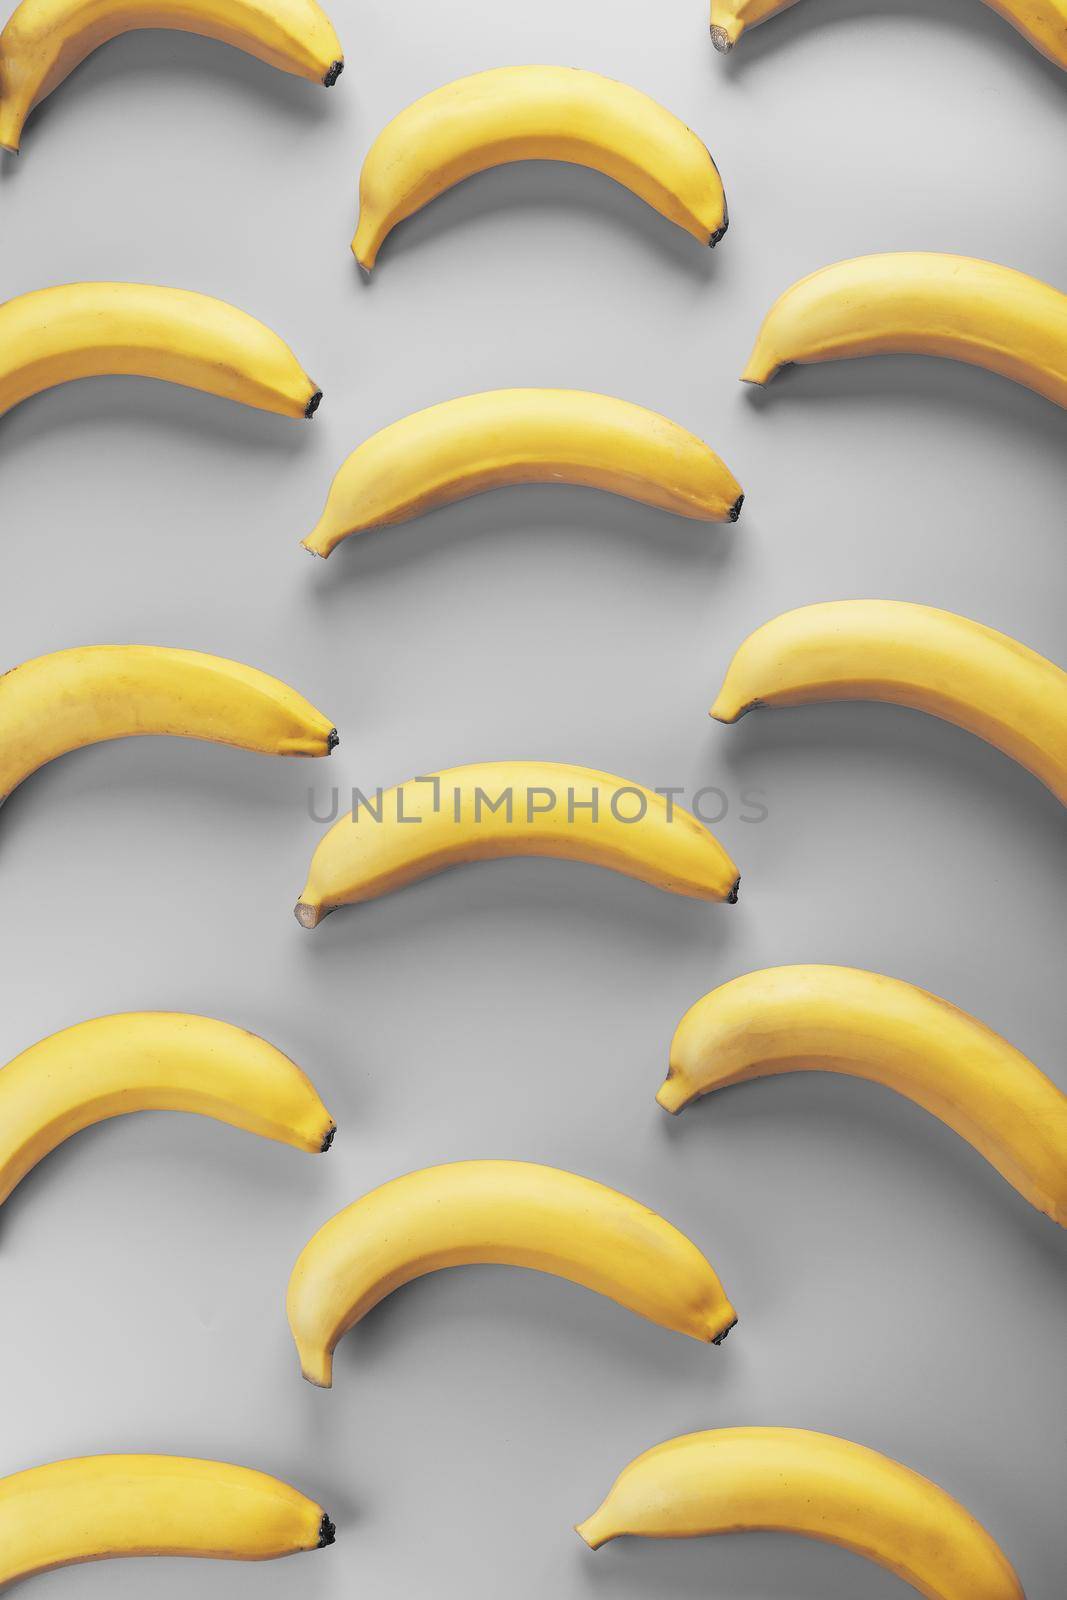 Geometric pattern of yellow bananas on a gray background in the Fashionable colors of 2021. Top view. Minimal flat style. Pop art design, creative summer concept.